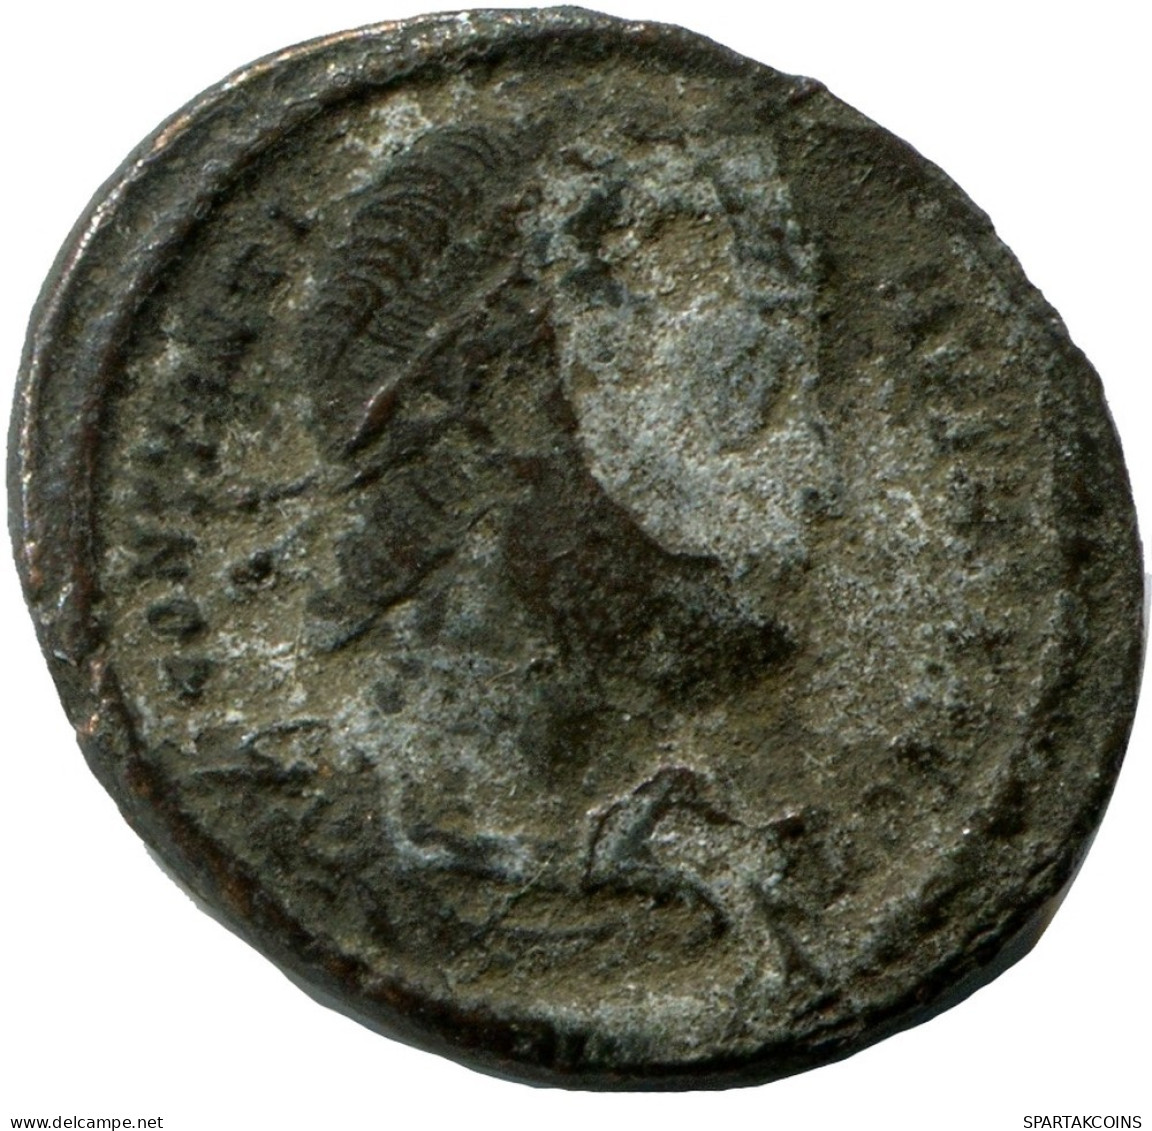 CONSTANTINE I MINTED IN ANTIOCH FROM THE ROYAL ONTARIO MUSEUM #ANC10619.14.E.A - The Christian Empire (307 AD Tot 363 AD)